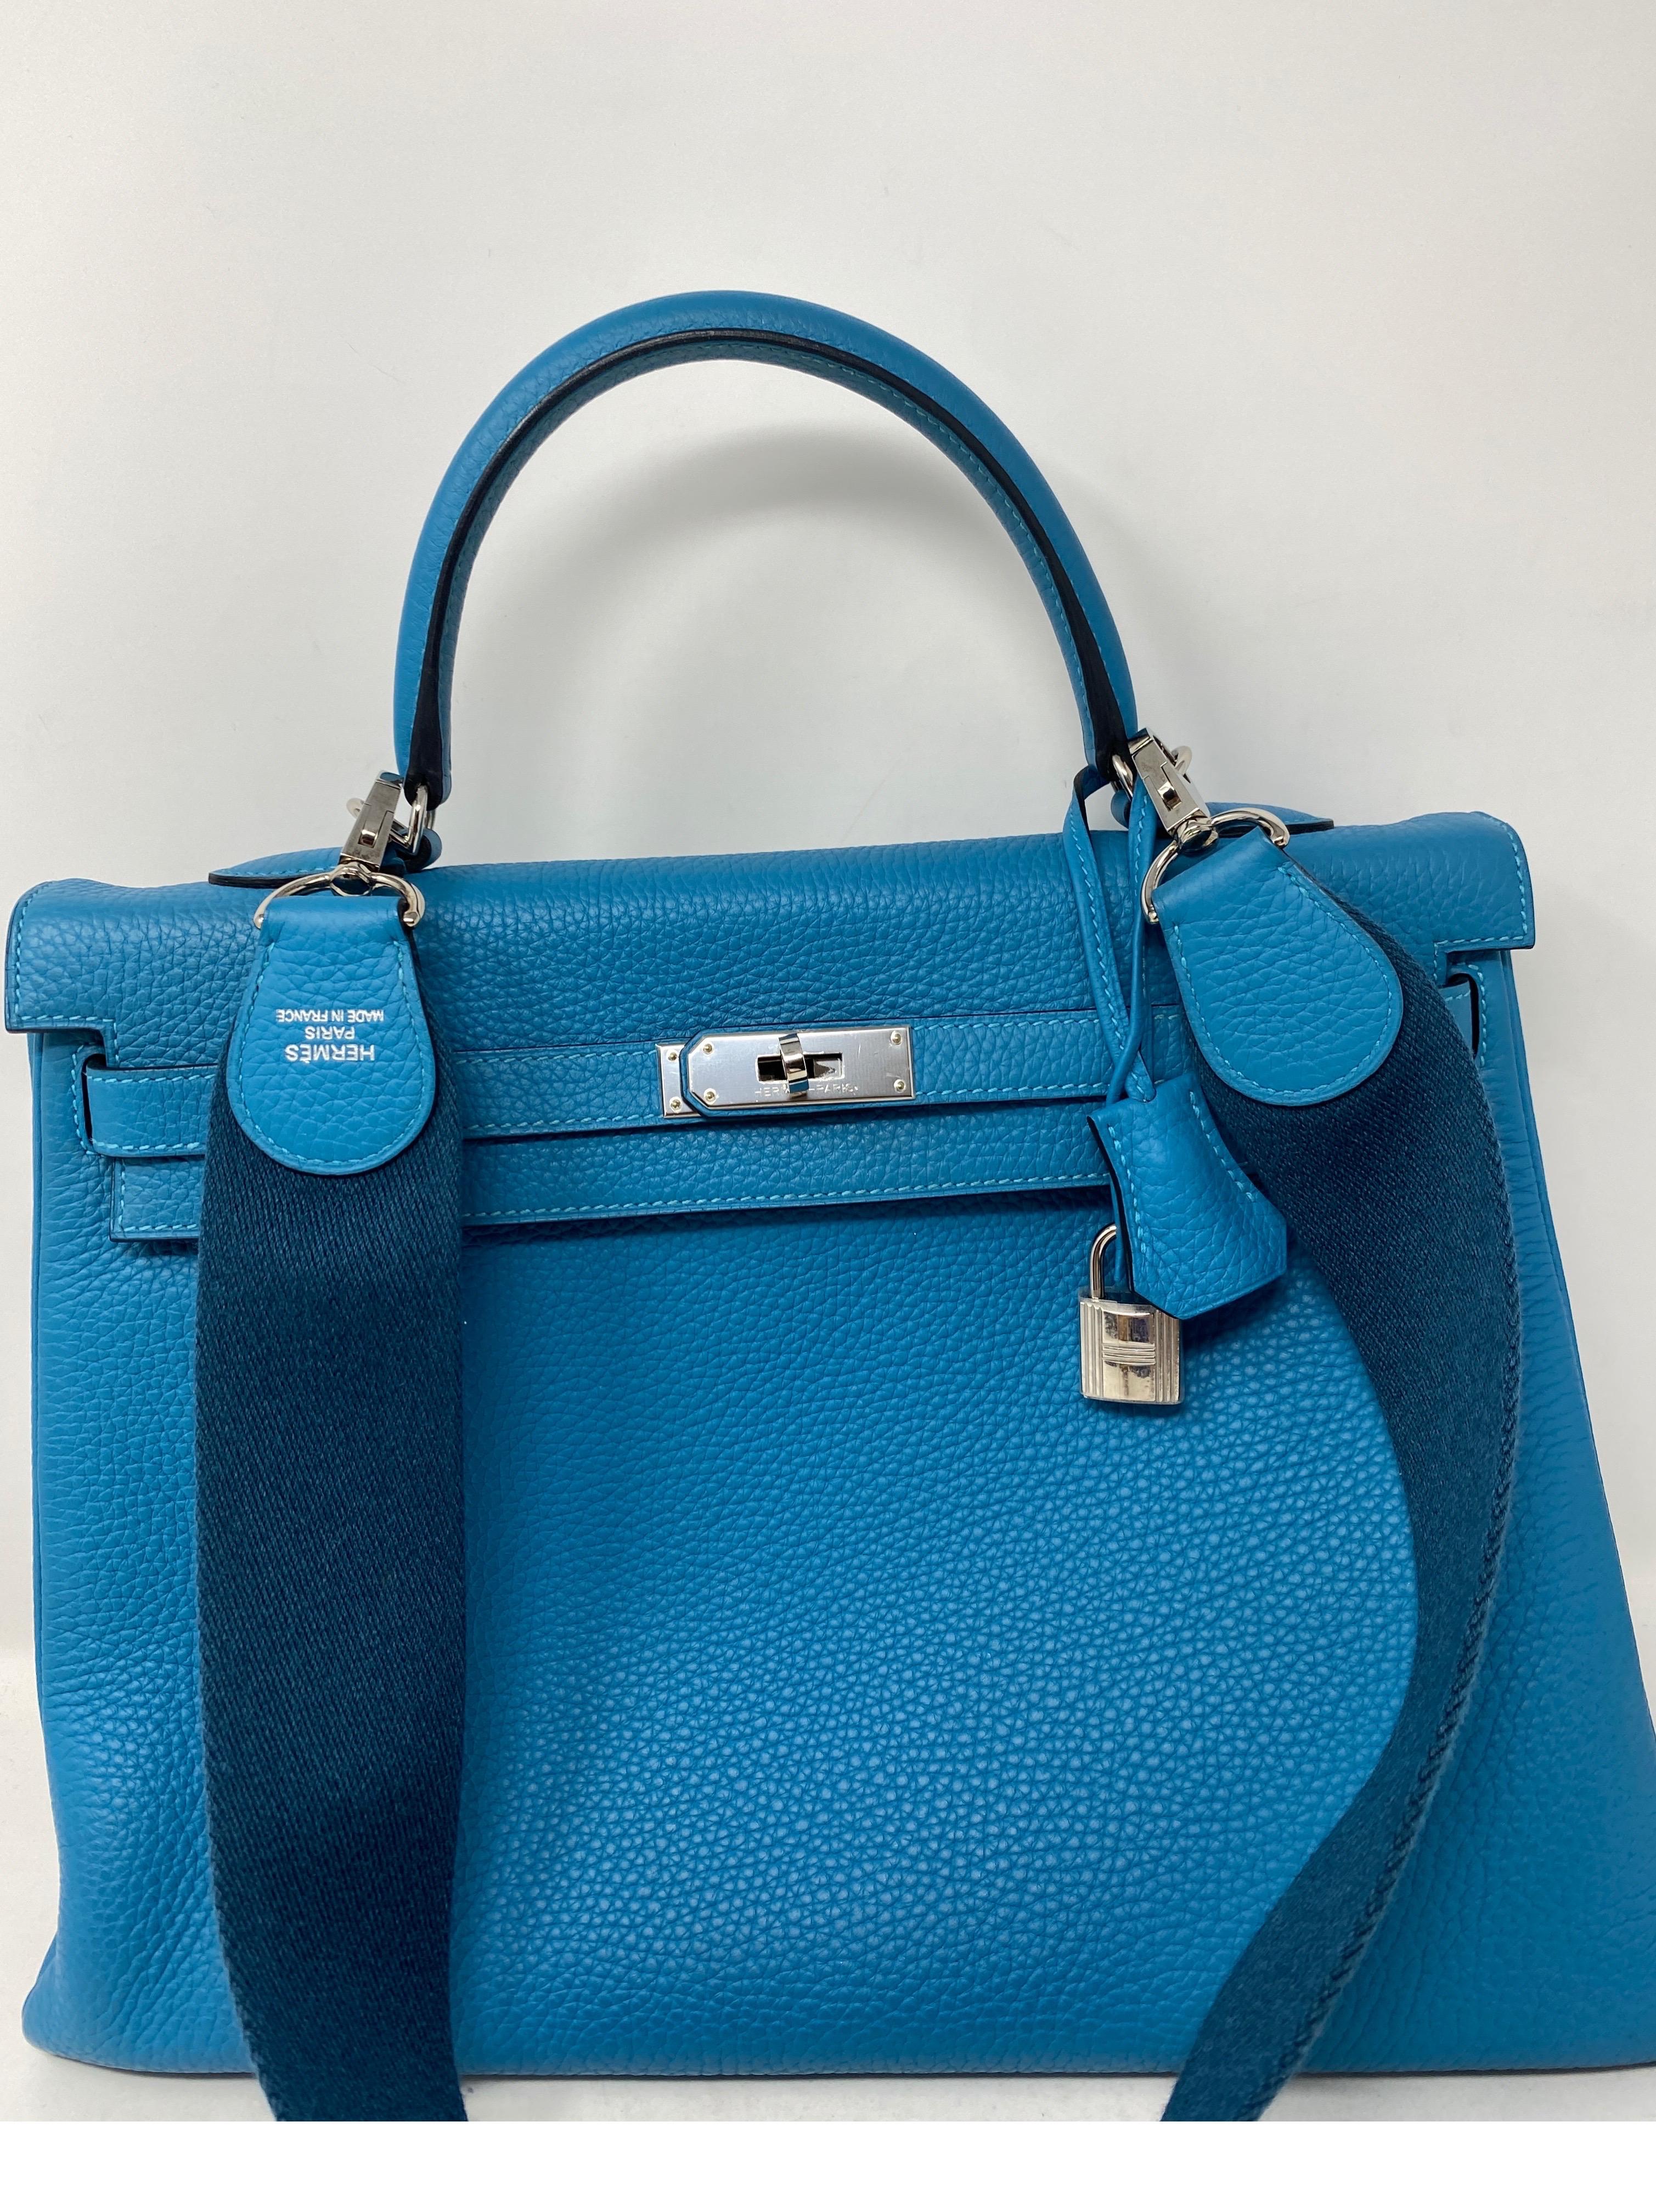 Hermes Kelly 35 Turquoise Amazone Taurillon Clemence Leather Bag. Turquoise and Colvert strap. Like new condition. Beautiful bag and unique strap. Comes with original receipt. From 2014. Includes clochette, lock, keys, and dust bag. Guaranteed